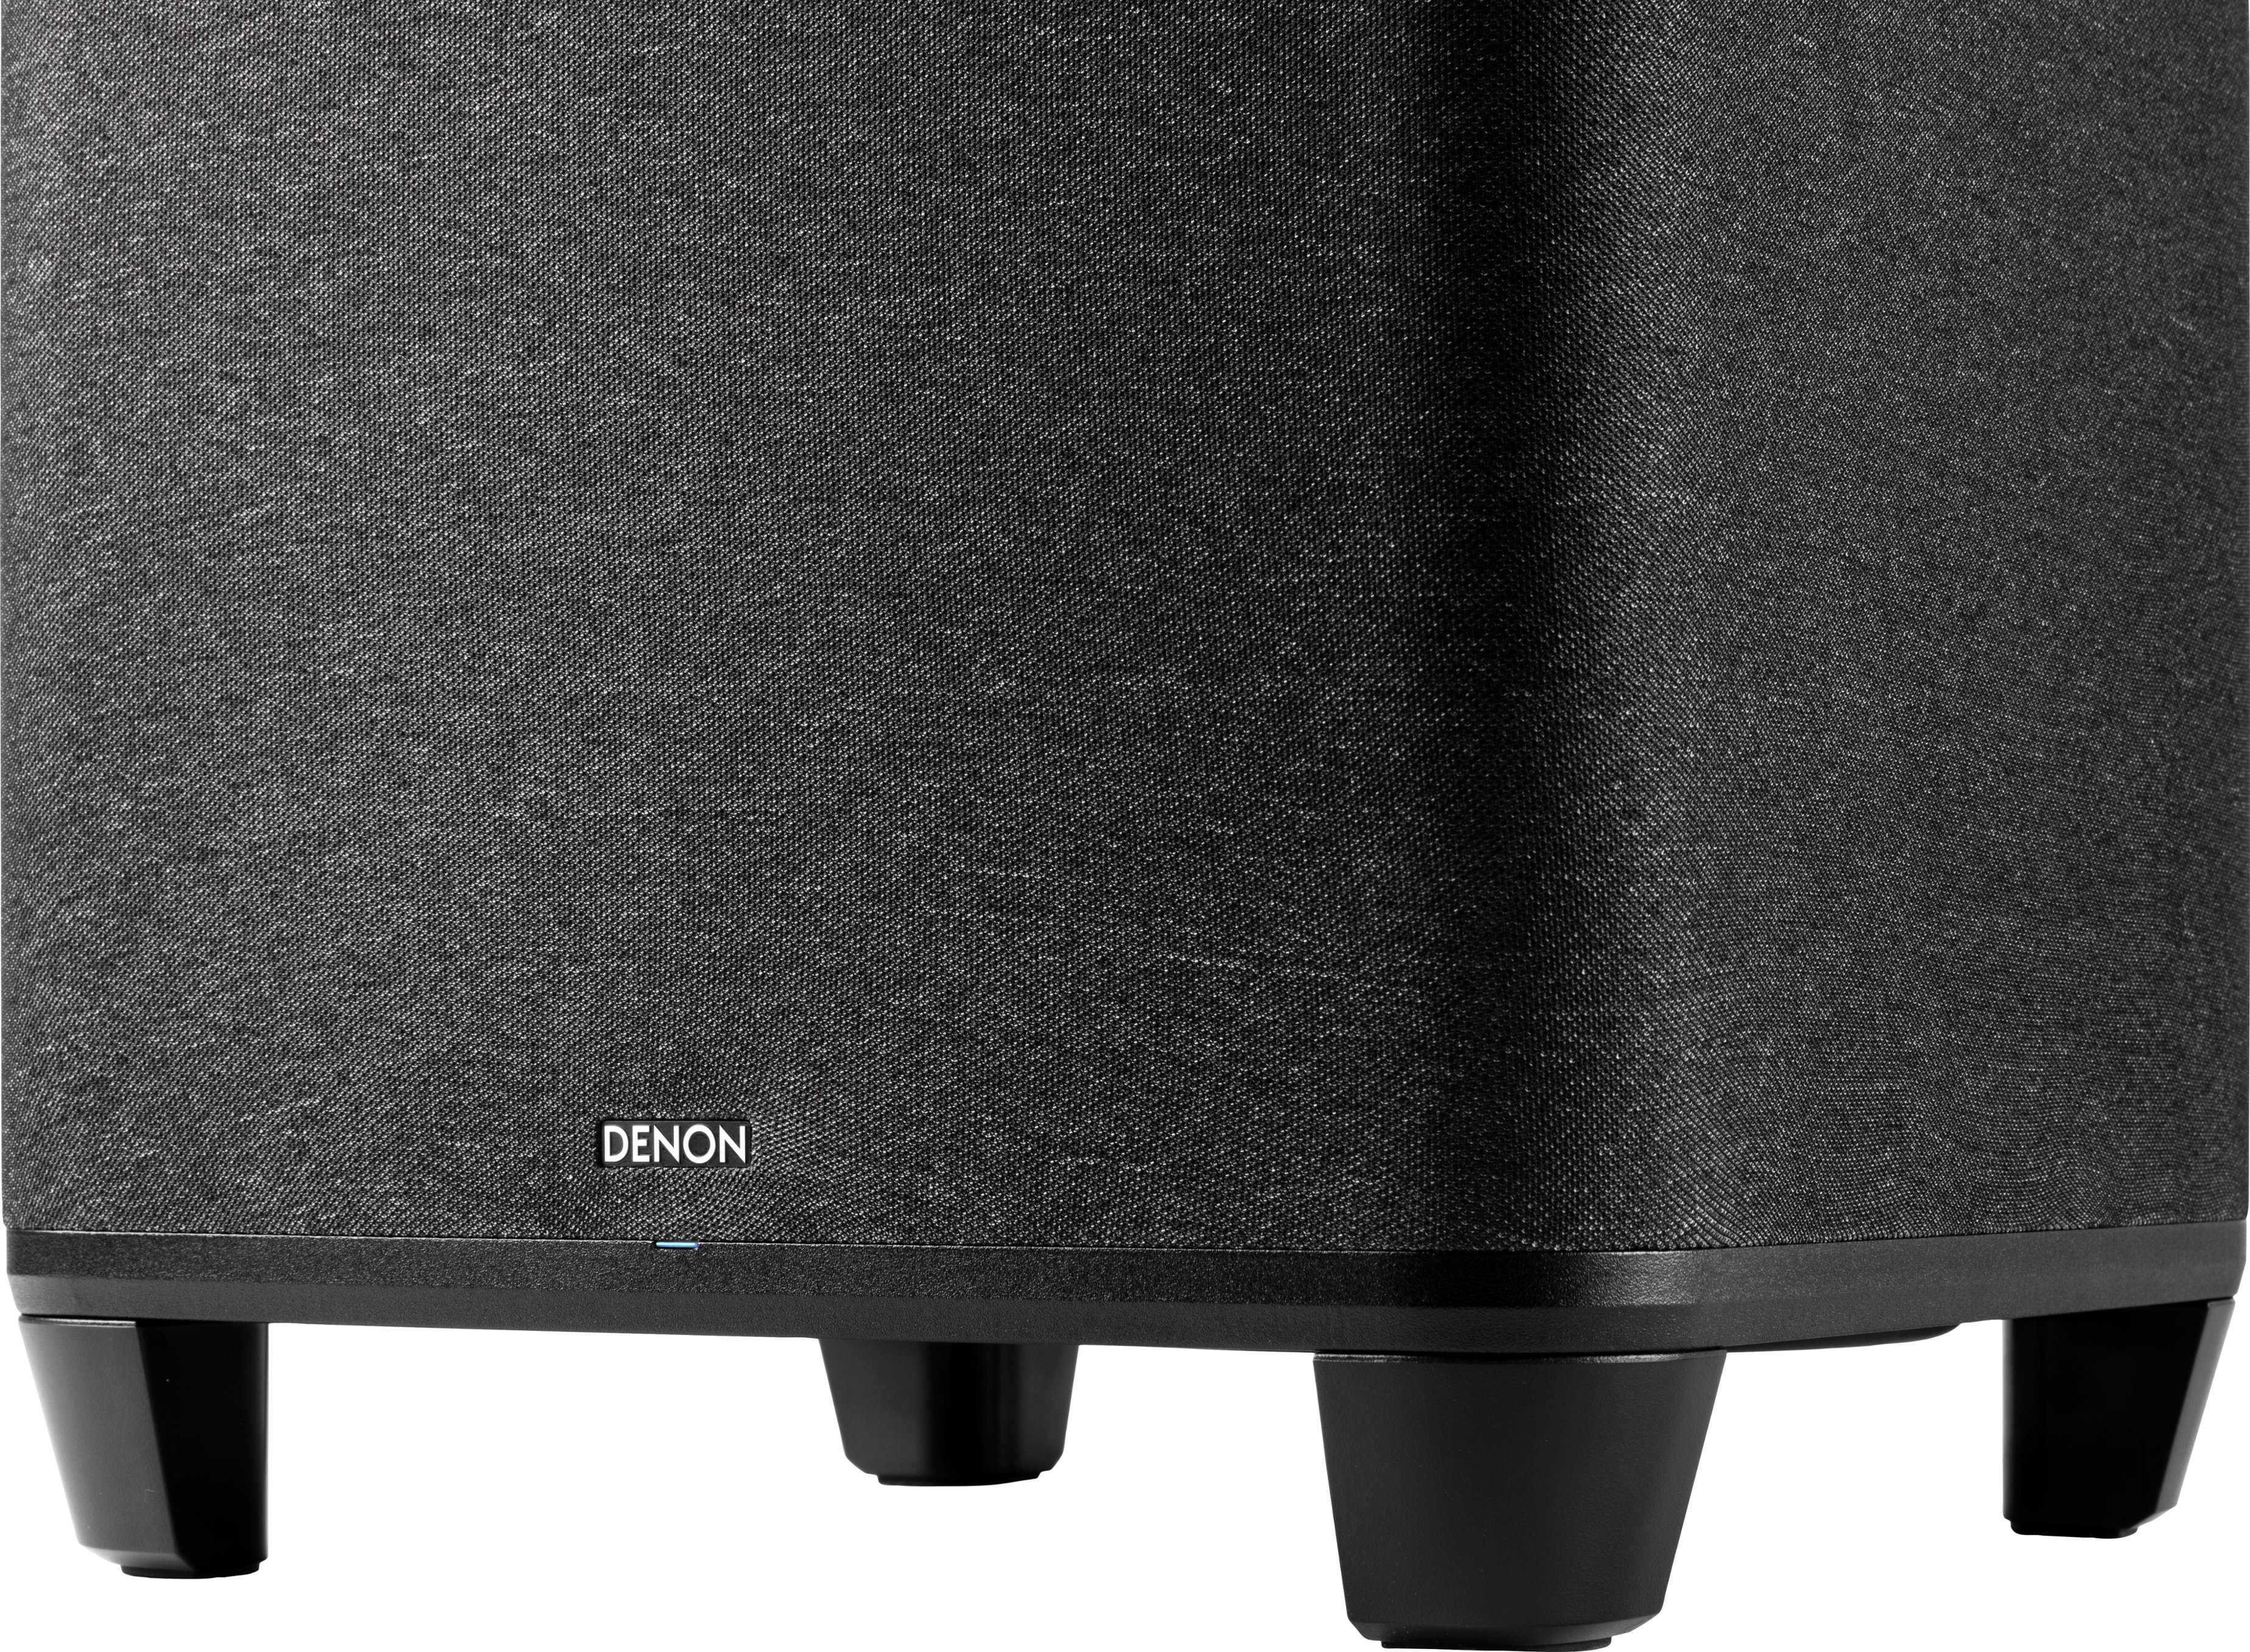 Back View: Denon - Home 150 Wireless Speaker with HEOS Built-in AirPlay 2 and Bluetooth - White